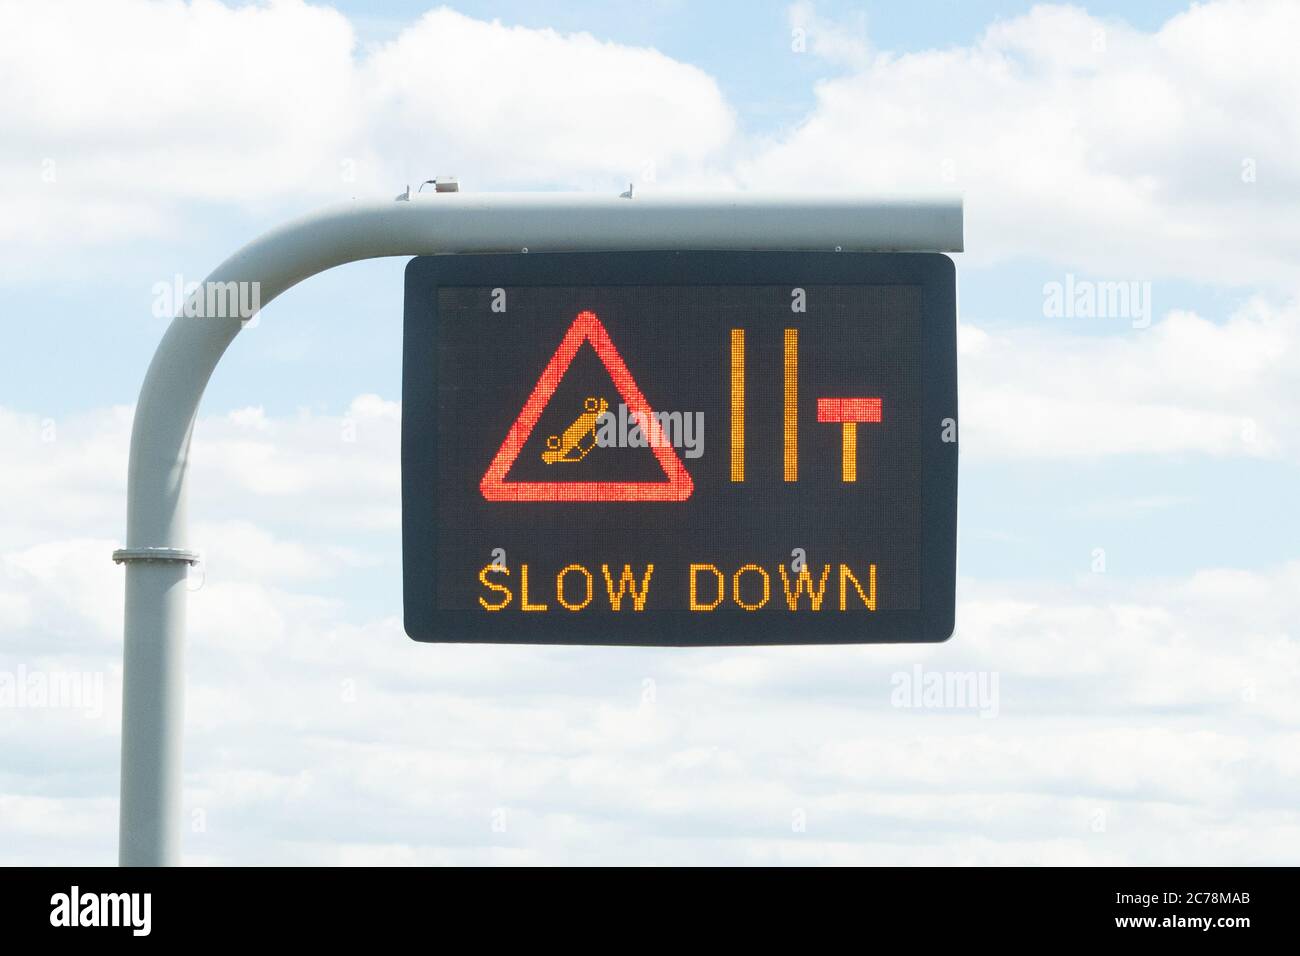 Slow Down closed lane because of an accident variable message sign on UK motorway Stock Photo